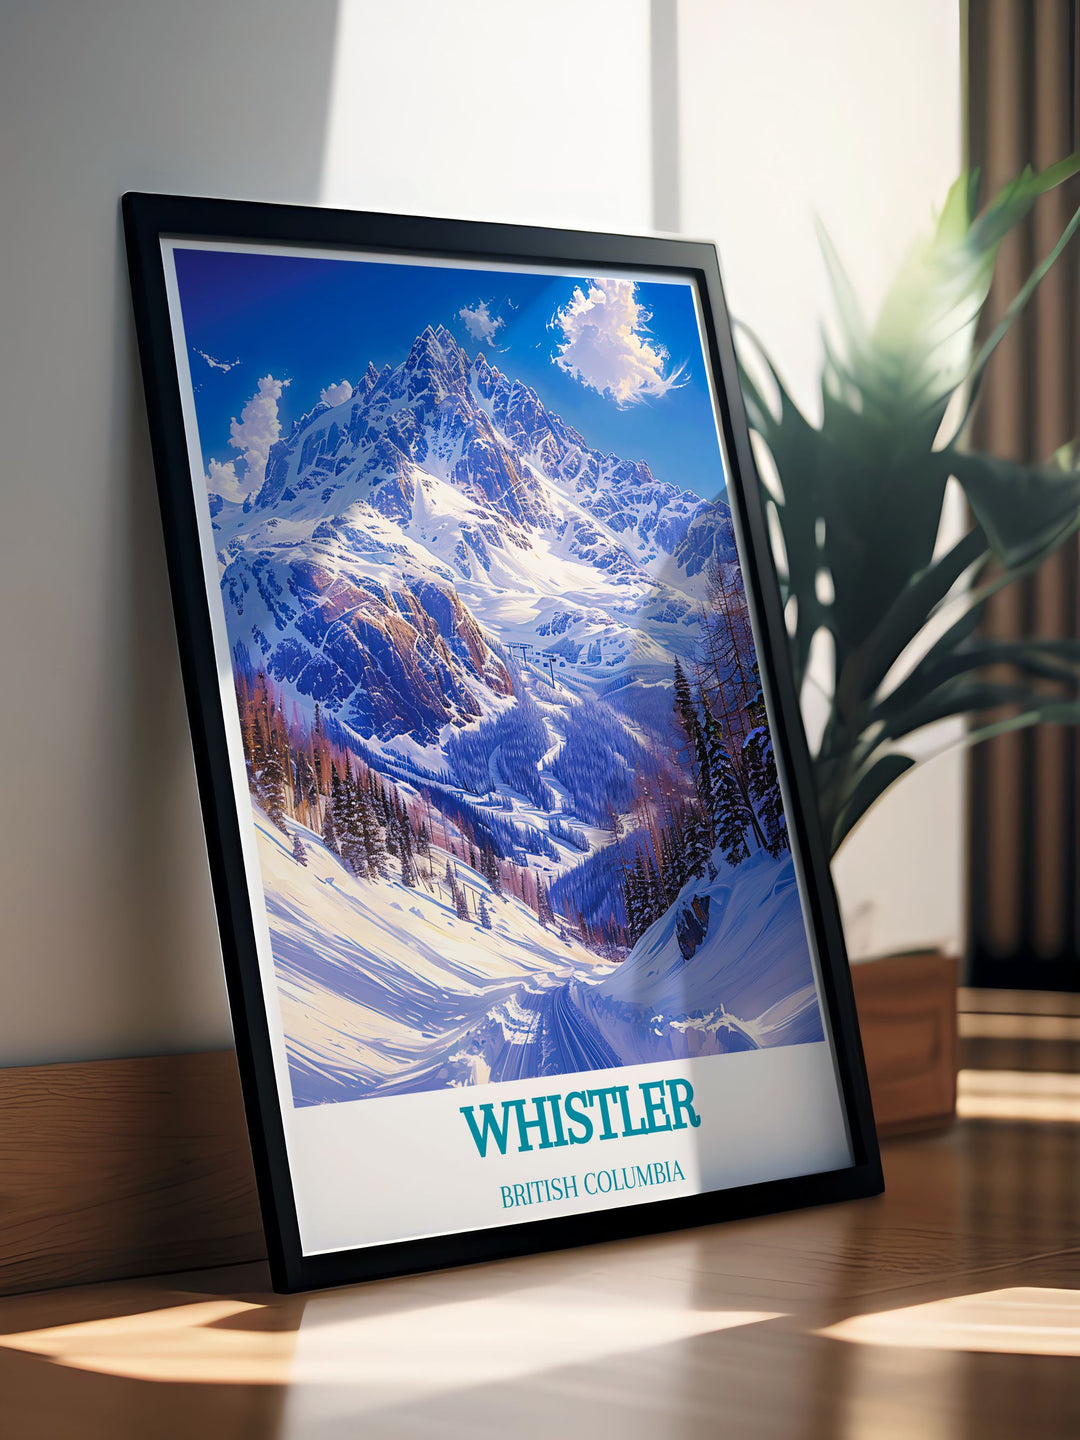 Exquisite canvas art depicting the iconic slopes of Whistler Blackcomb, British Columbia. This print highlights the expansive skiable terrain and snow covered peaks, perfect for adding a touch of adventure to your home decor.